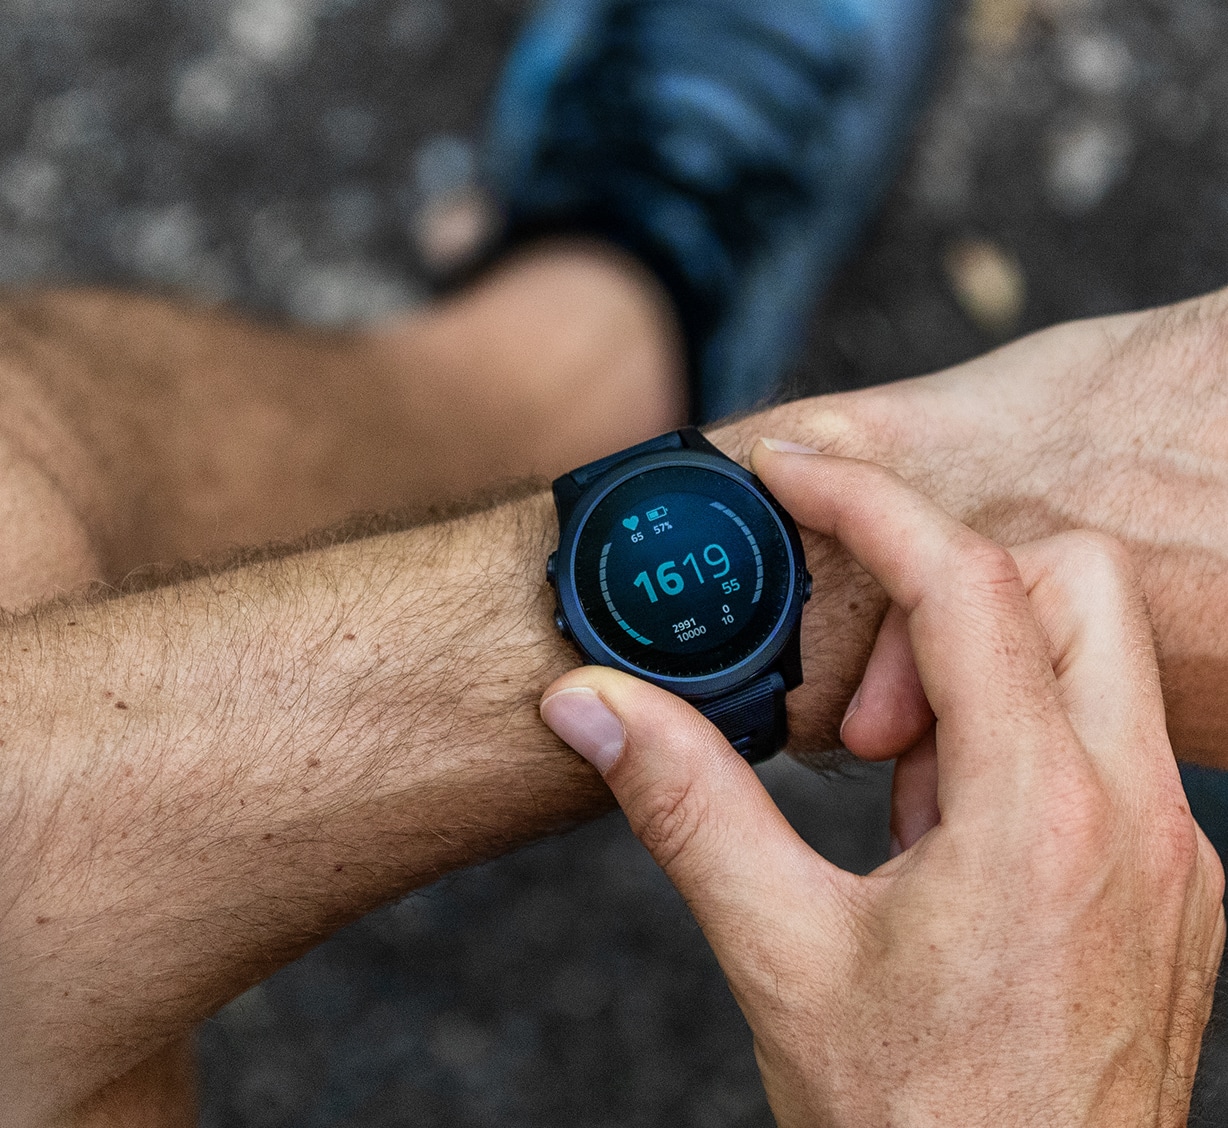 Do GPS watches need the internet?